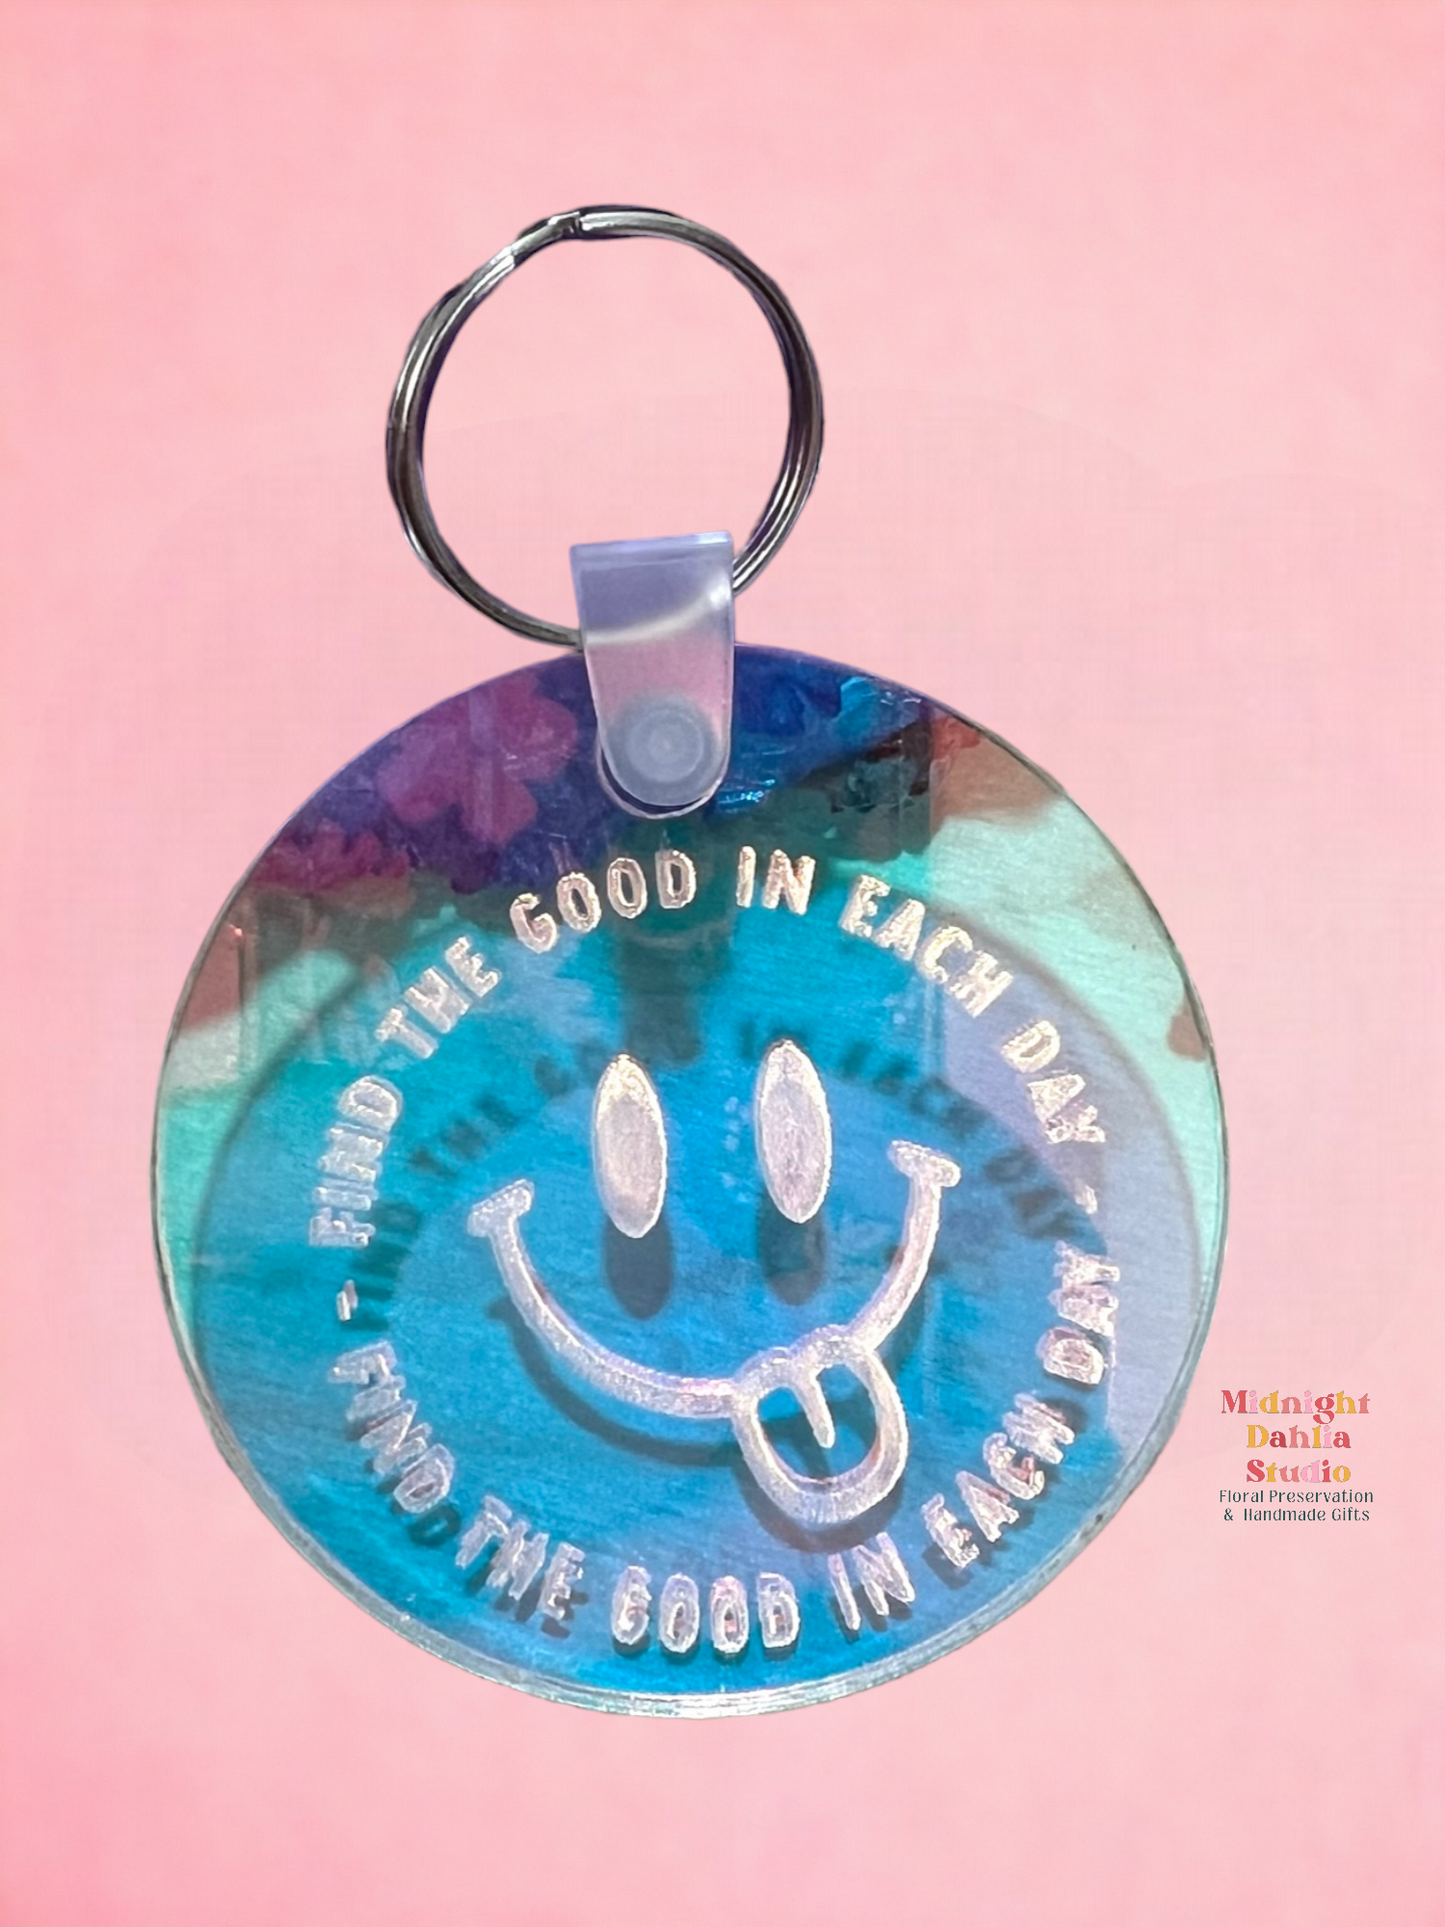 Find the Good In Each Day Round Acrylic Keychain